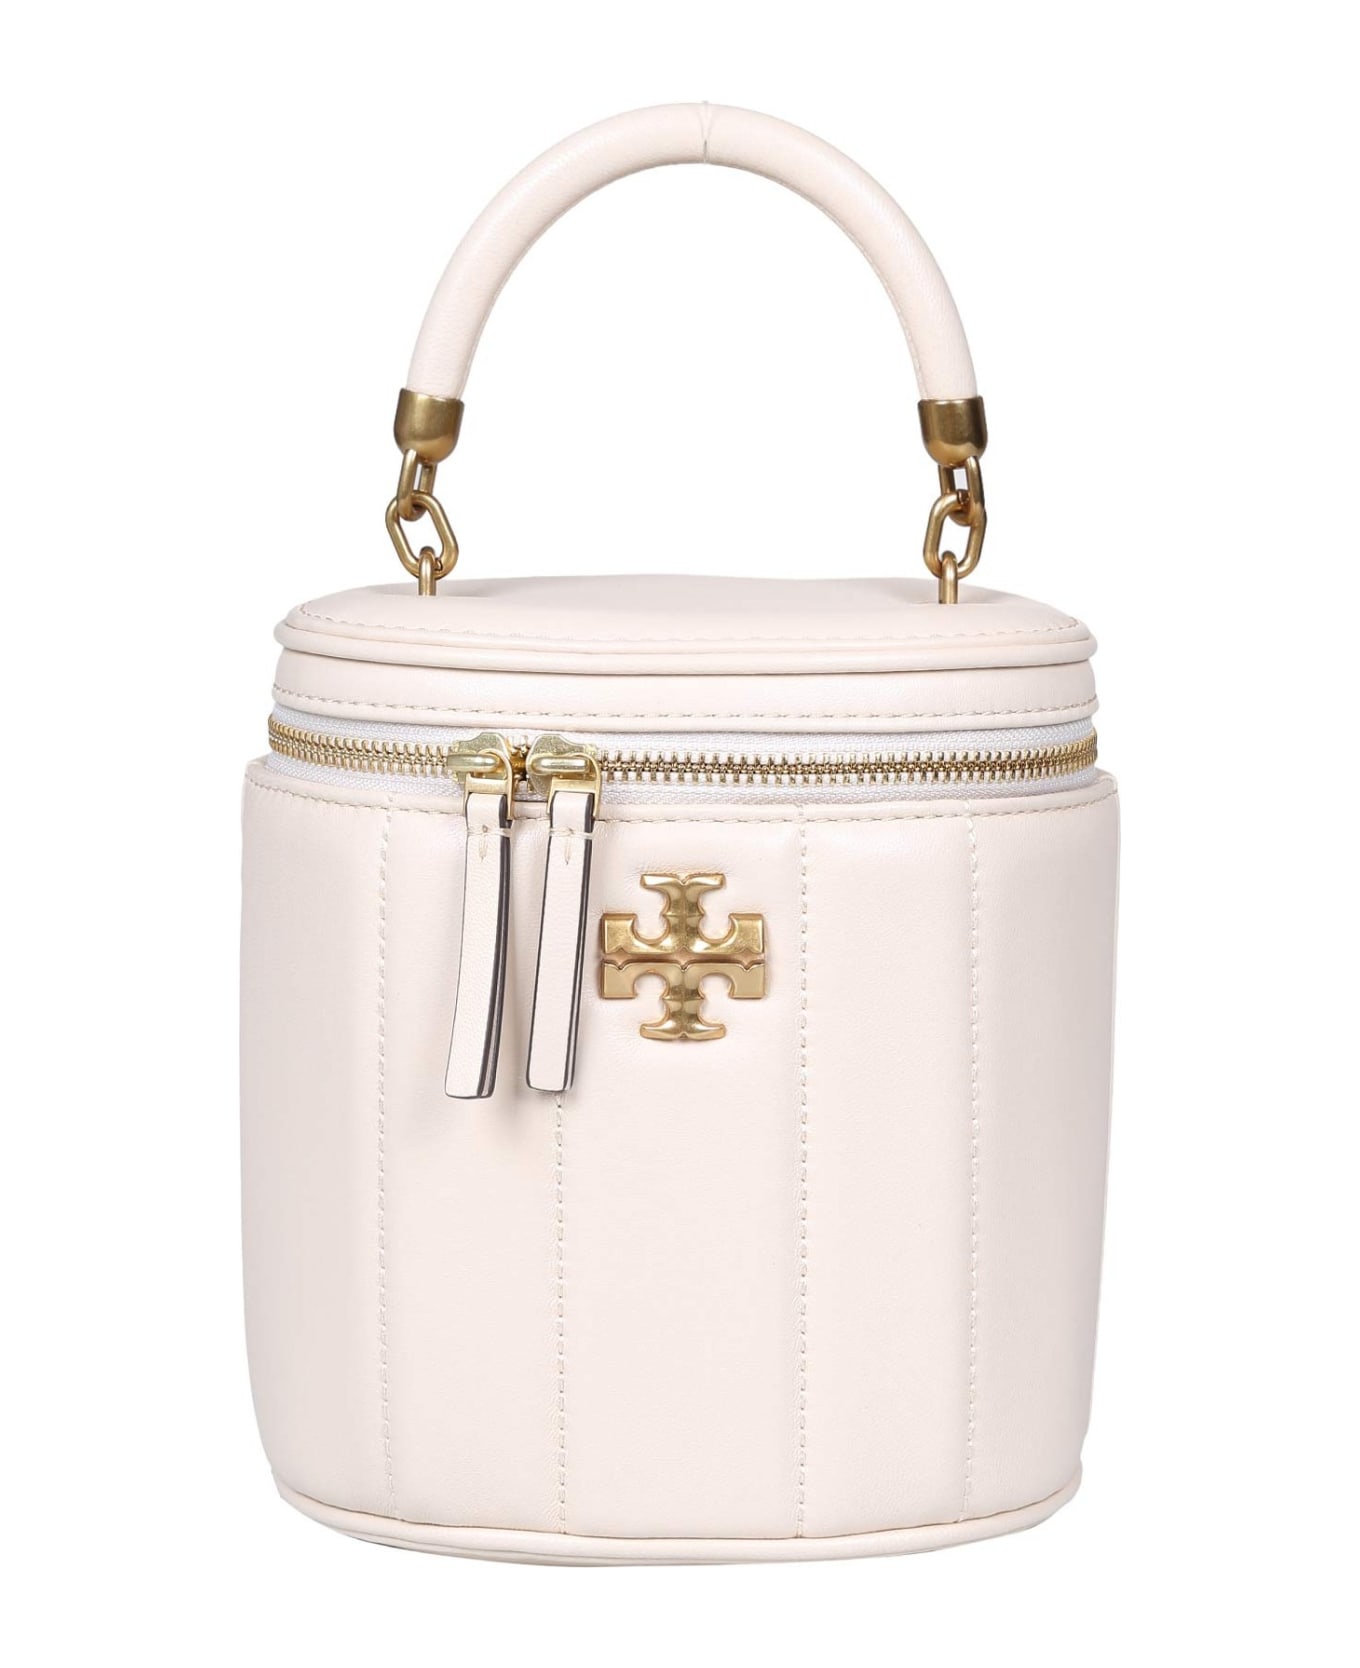 Tory Burch Kira Vanity Case In Cream Color Leather | italist, ALWAYS LIKE A  SALE